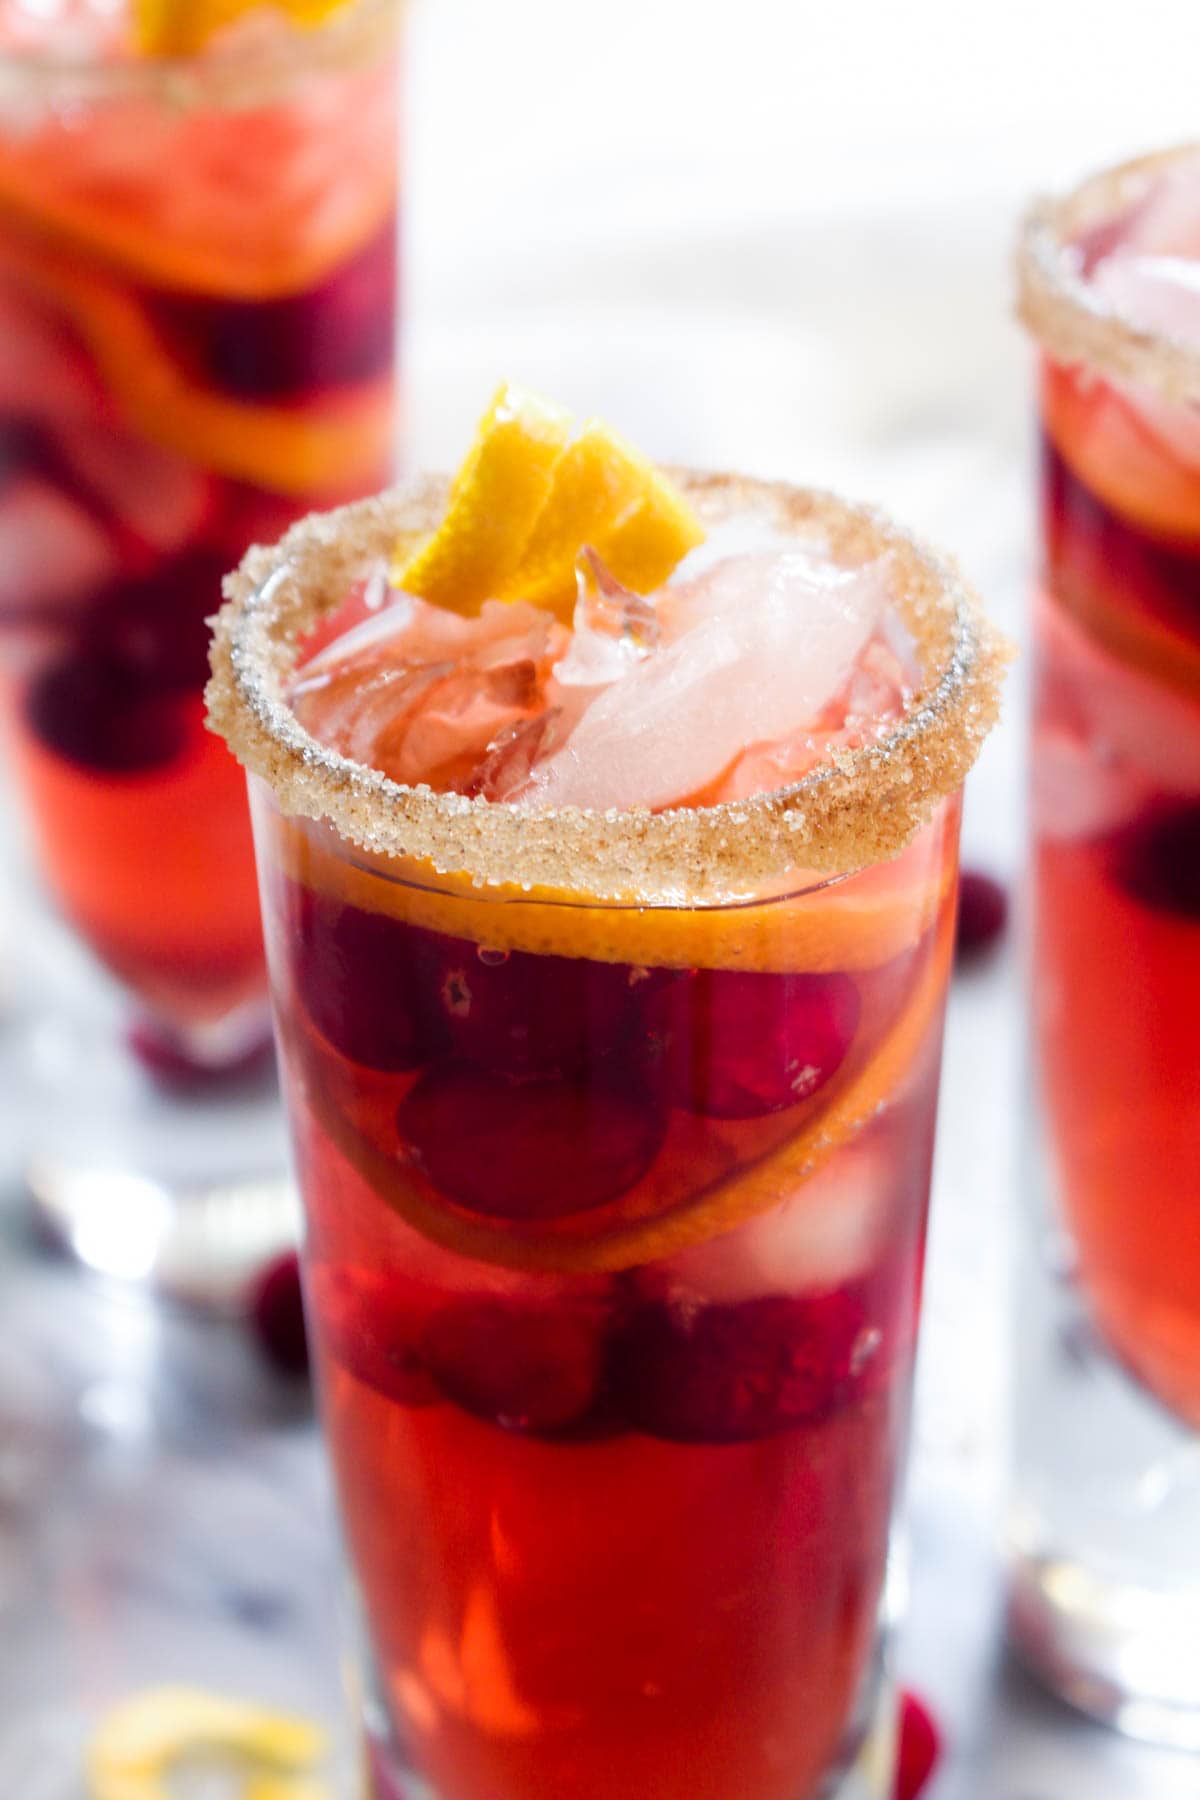 This Kombucha Sangria recipe is a non-alcoholic party drink. Effervescent kombucha gives it a sophisticated feel and cranberries and orange slices infuse this healthy drink with holiday flavor.